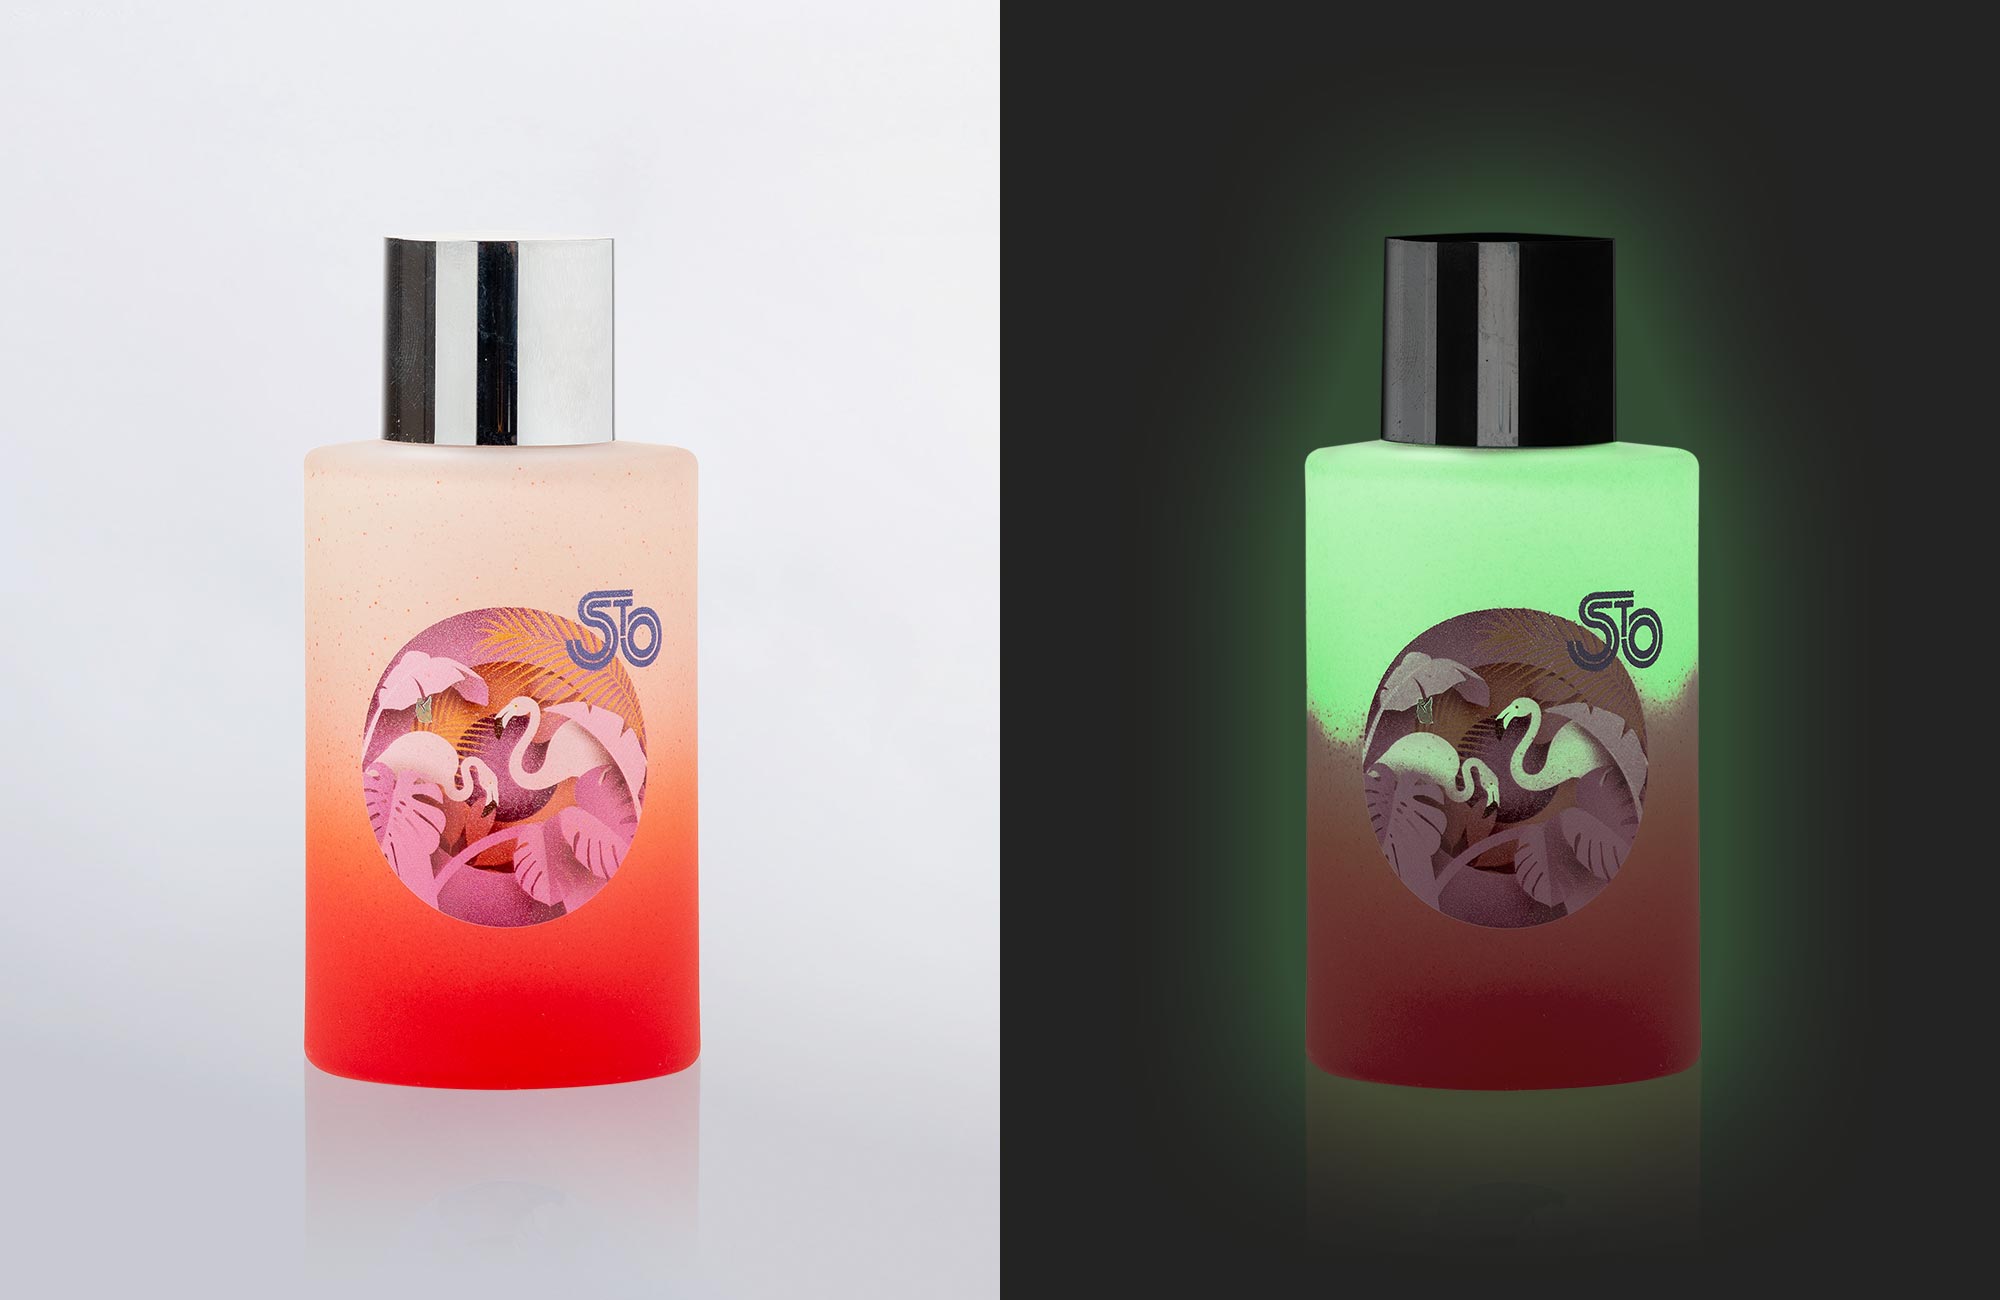 Bottles decorated with phosphorescent colour which shine in the dark